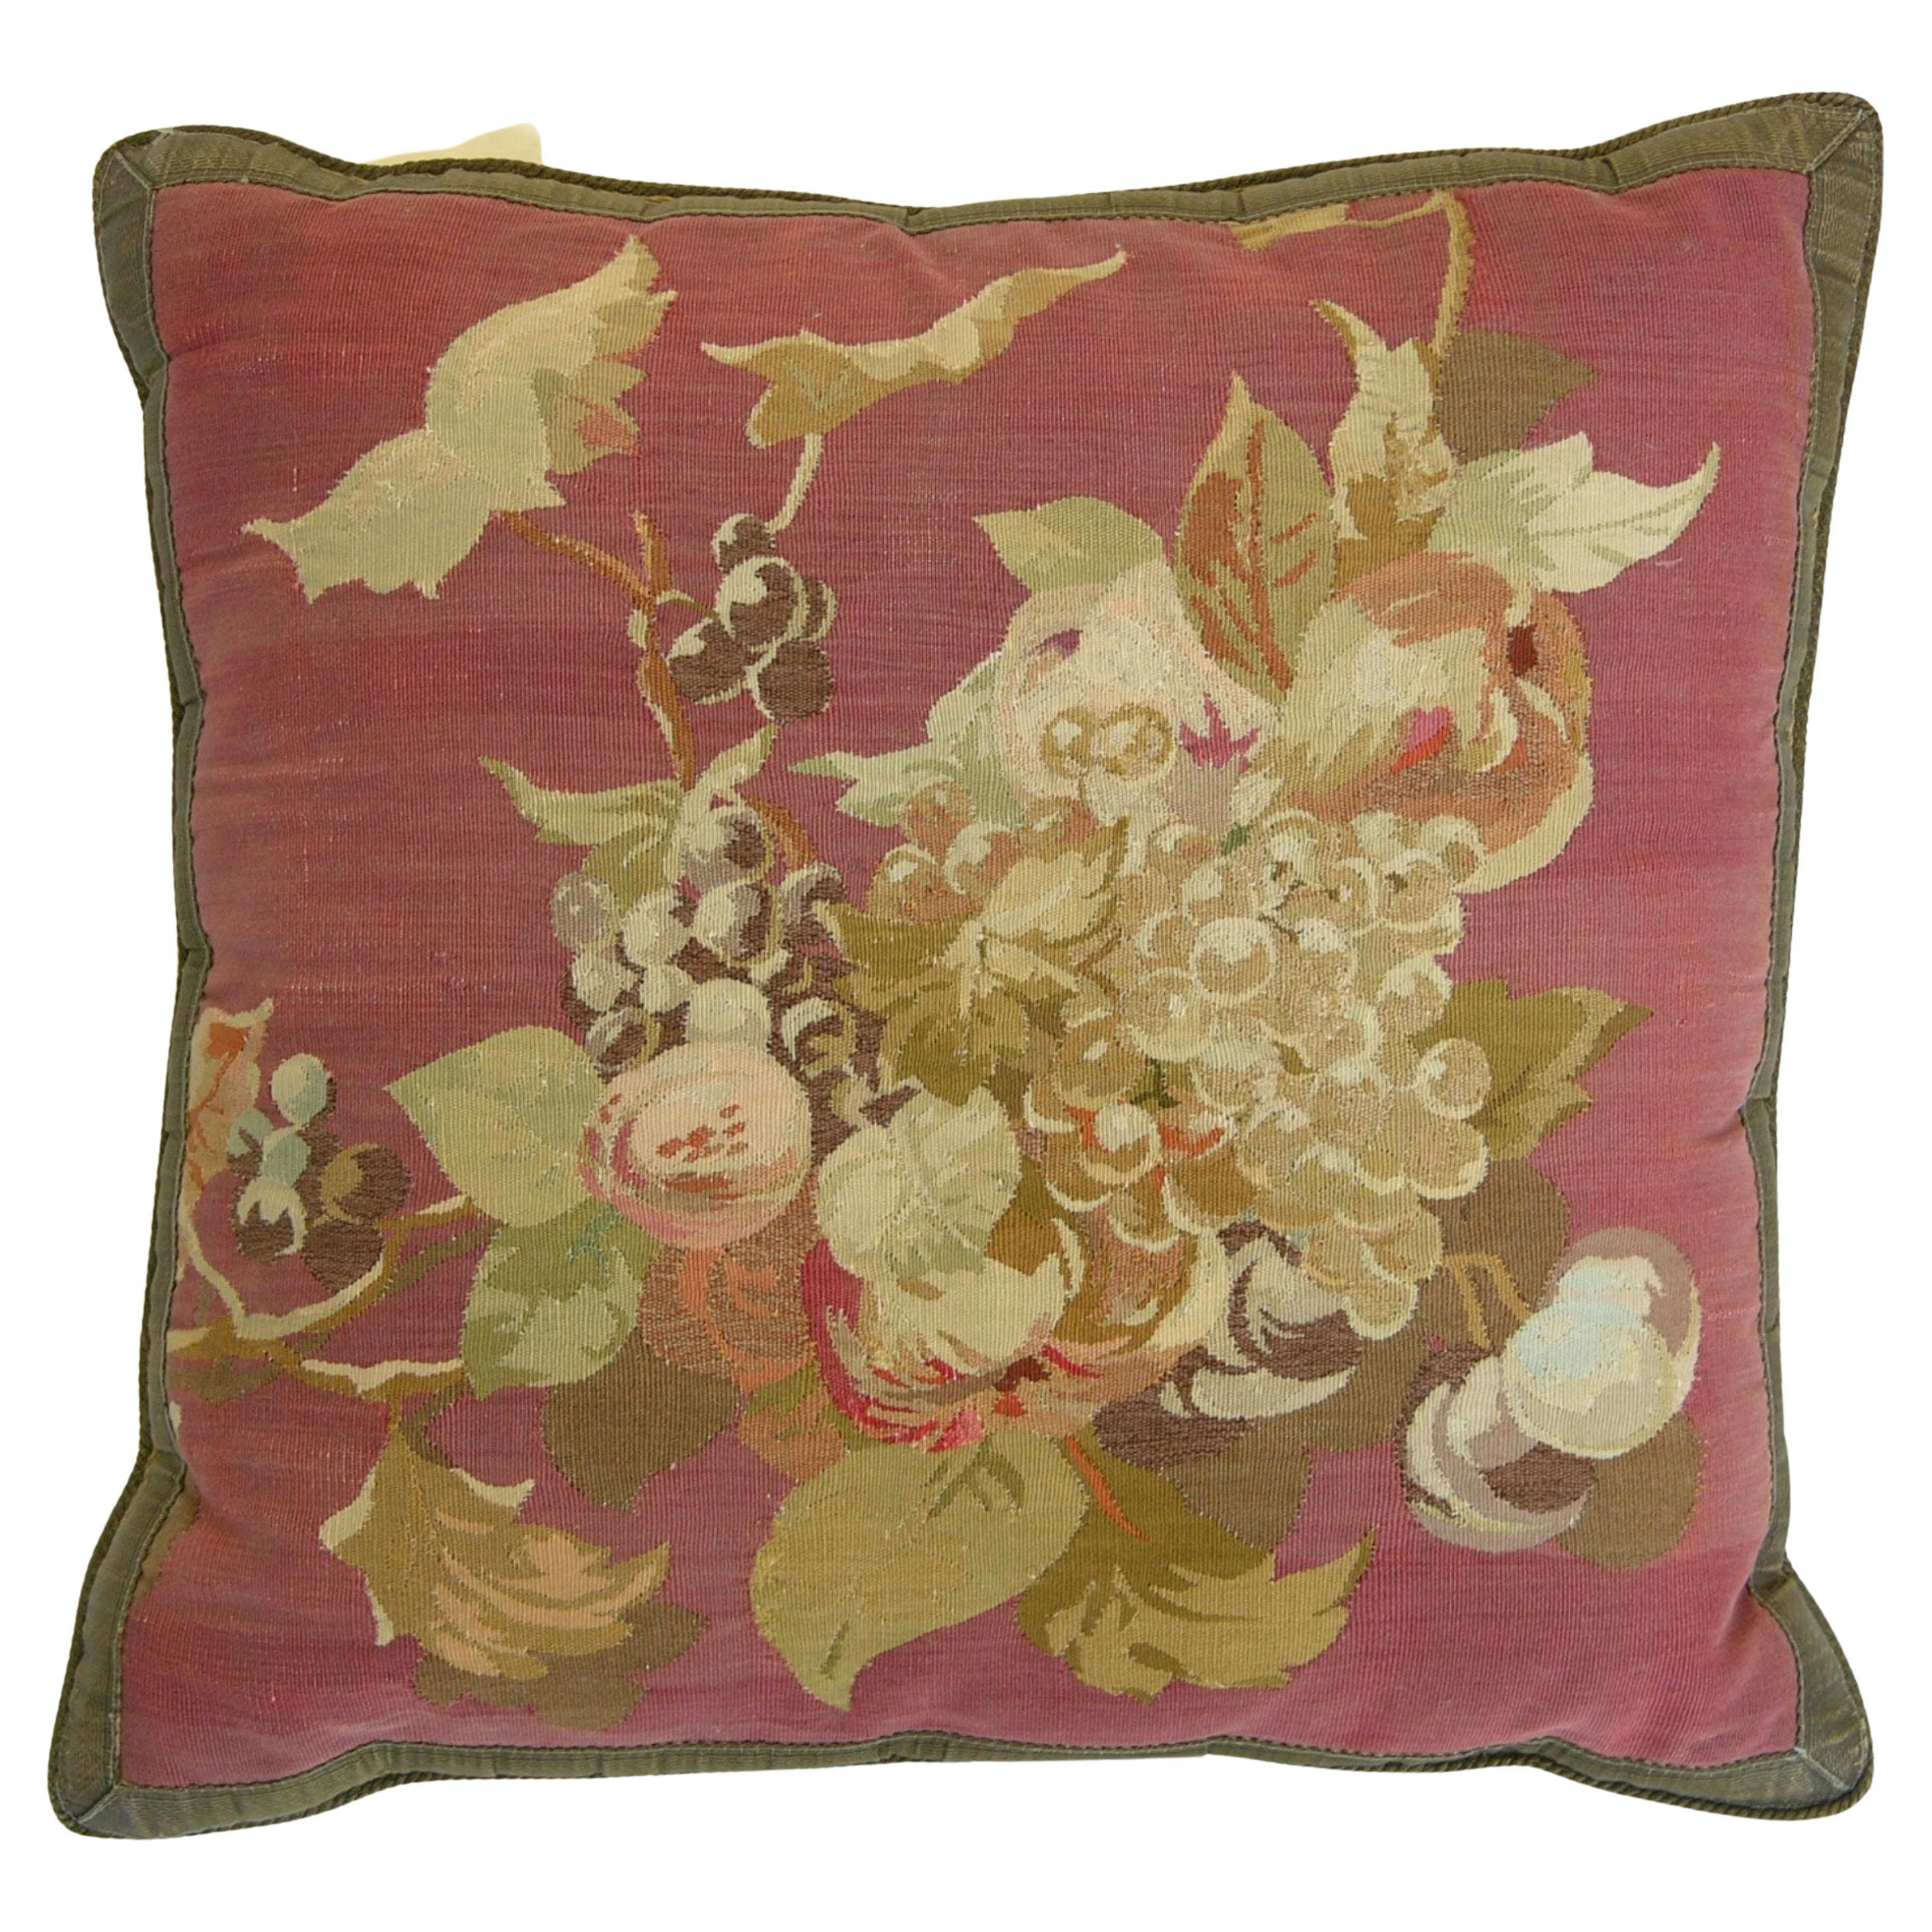 Circa 18th Century Antique French Aubusson Tapestry Pillow For Sale